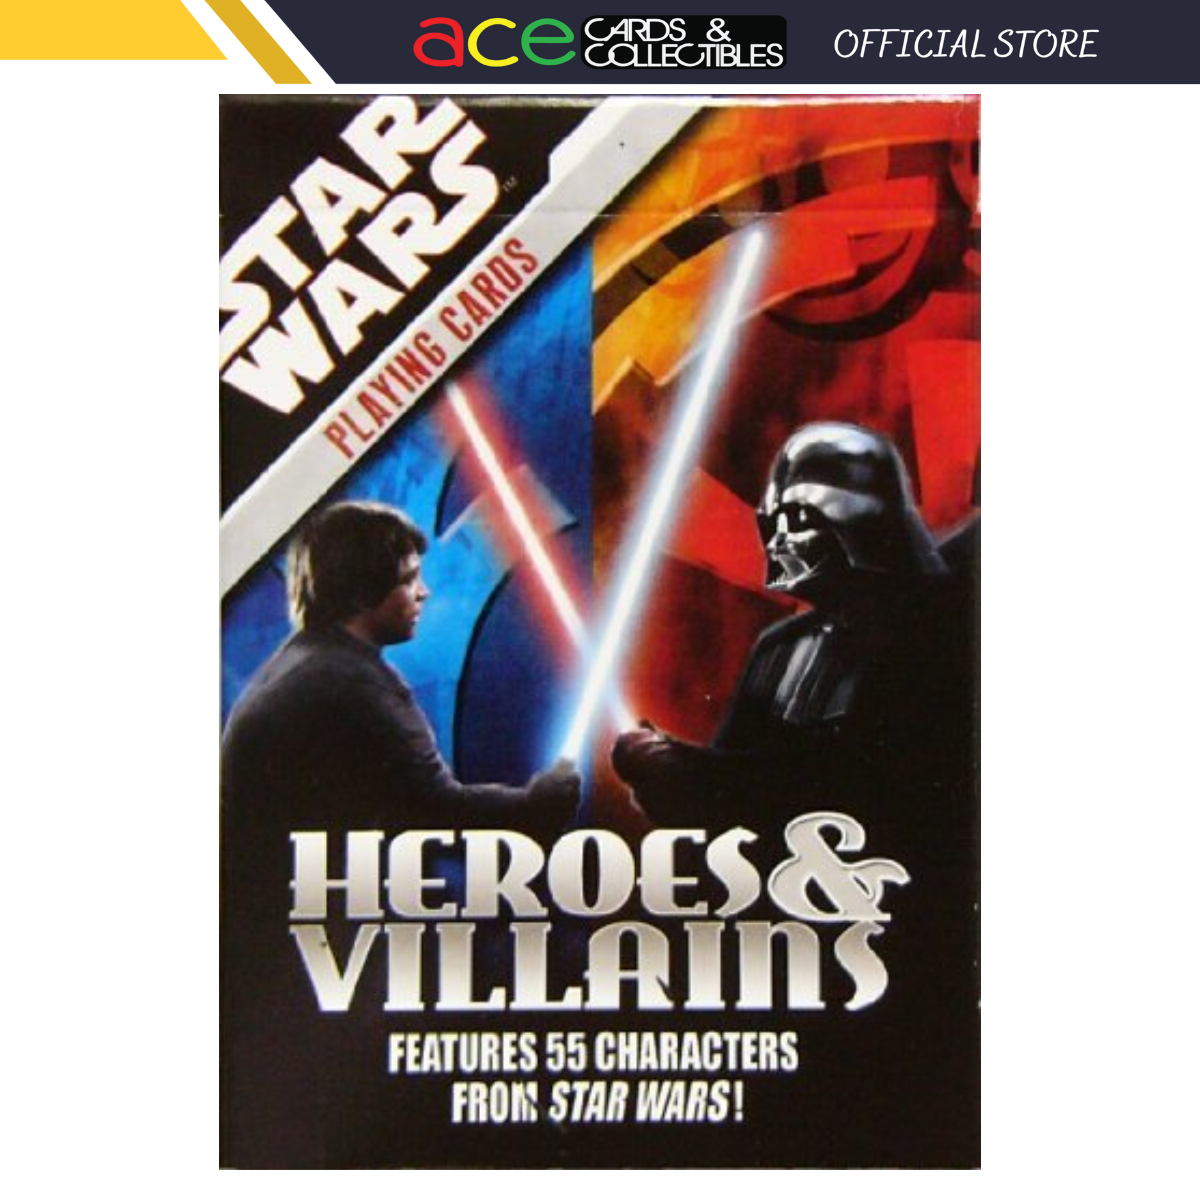 Star Wars Heroes &amp; Villains Playing Cards-Cartamundi-Ace Cards &amp; Collectibles